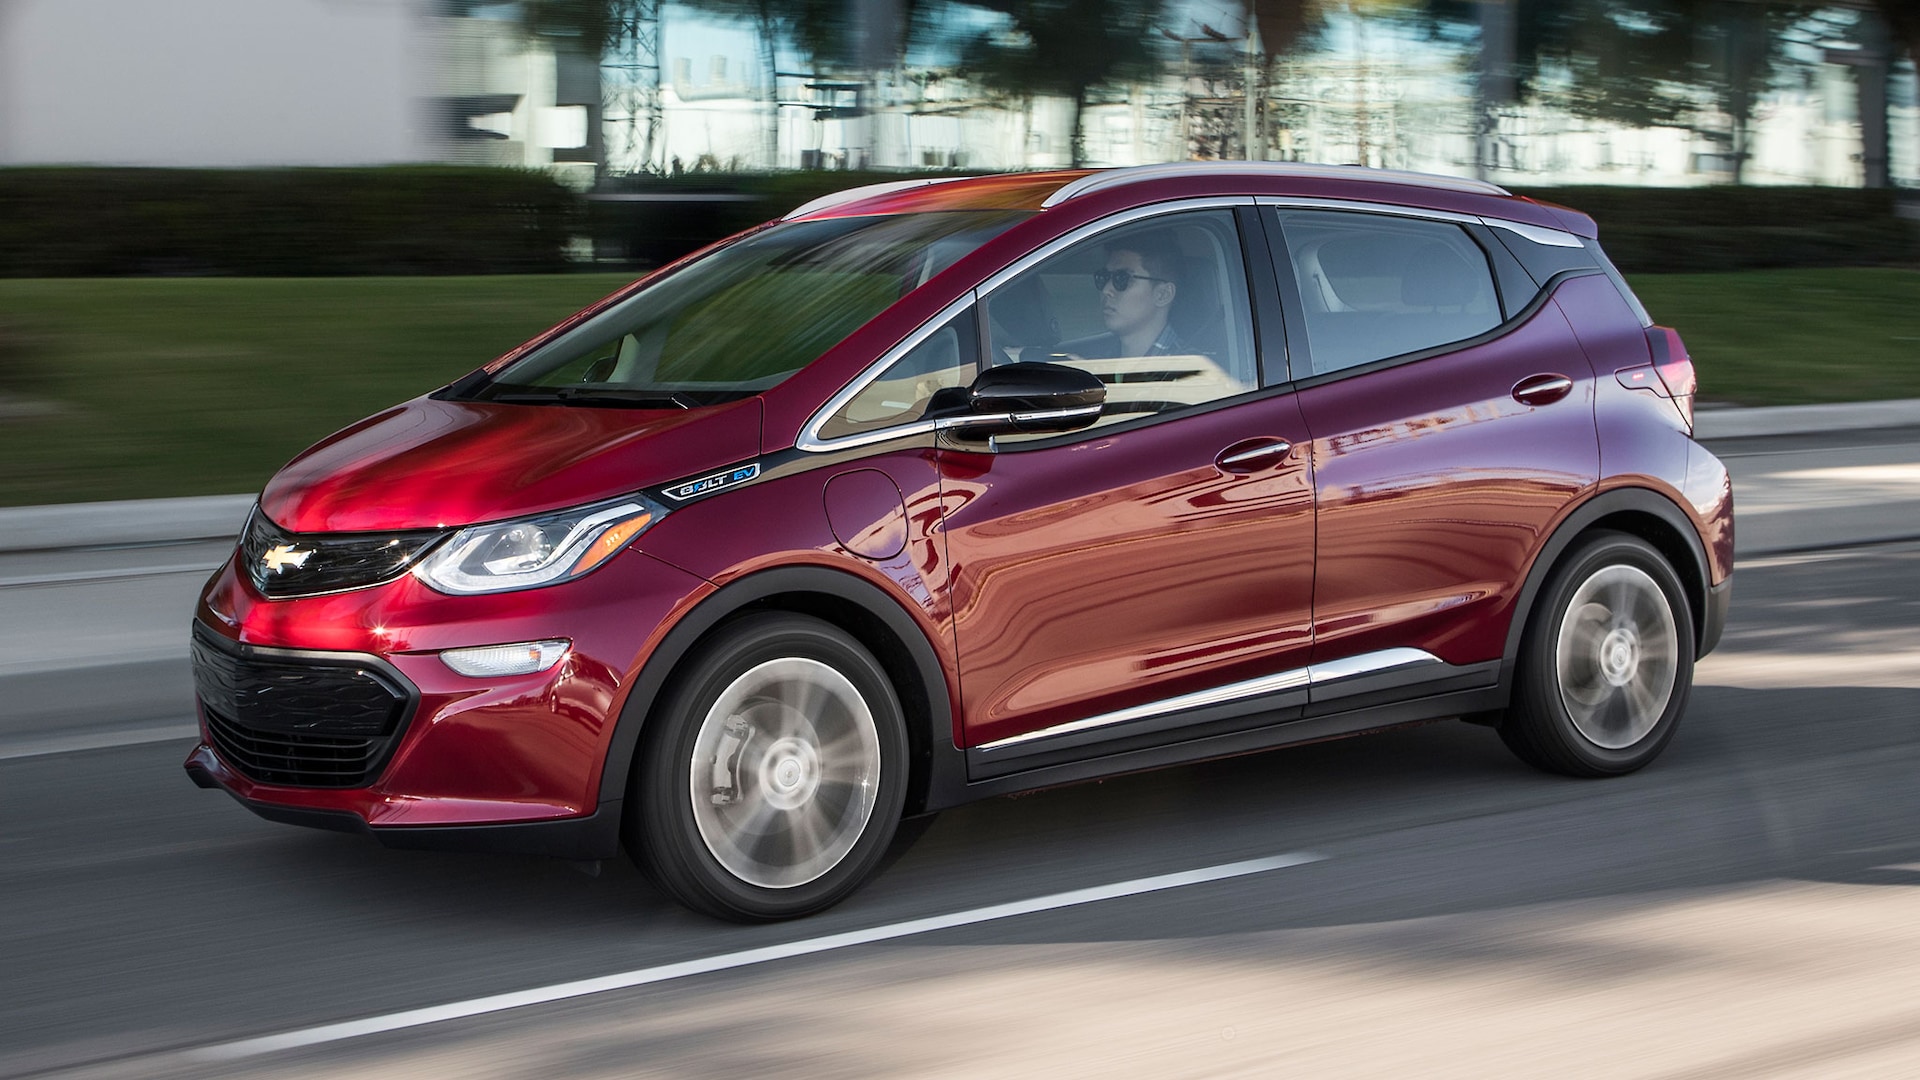 2020 Chevrolet Bolt Review: Checking in With Our Former Car of the Year